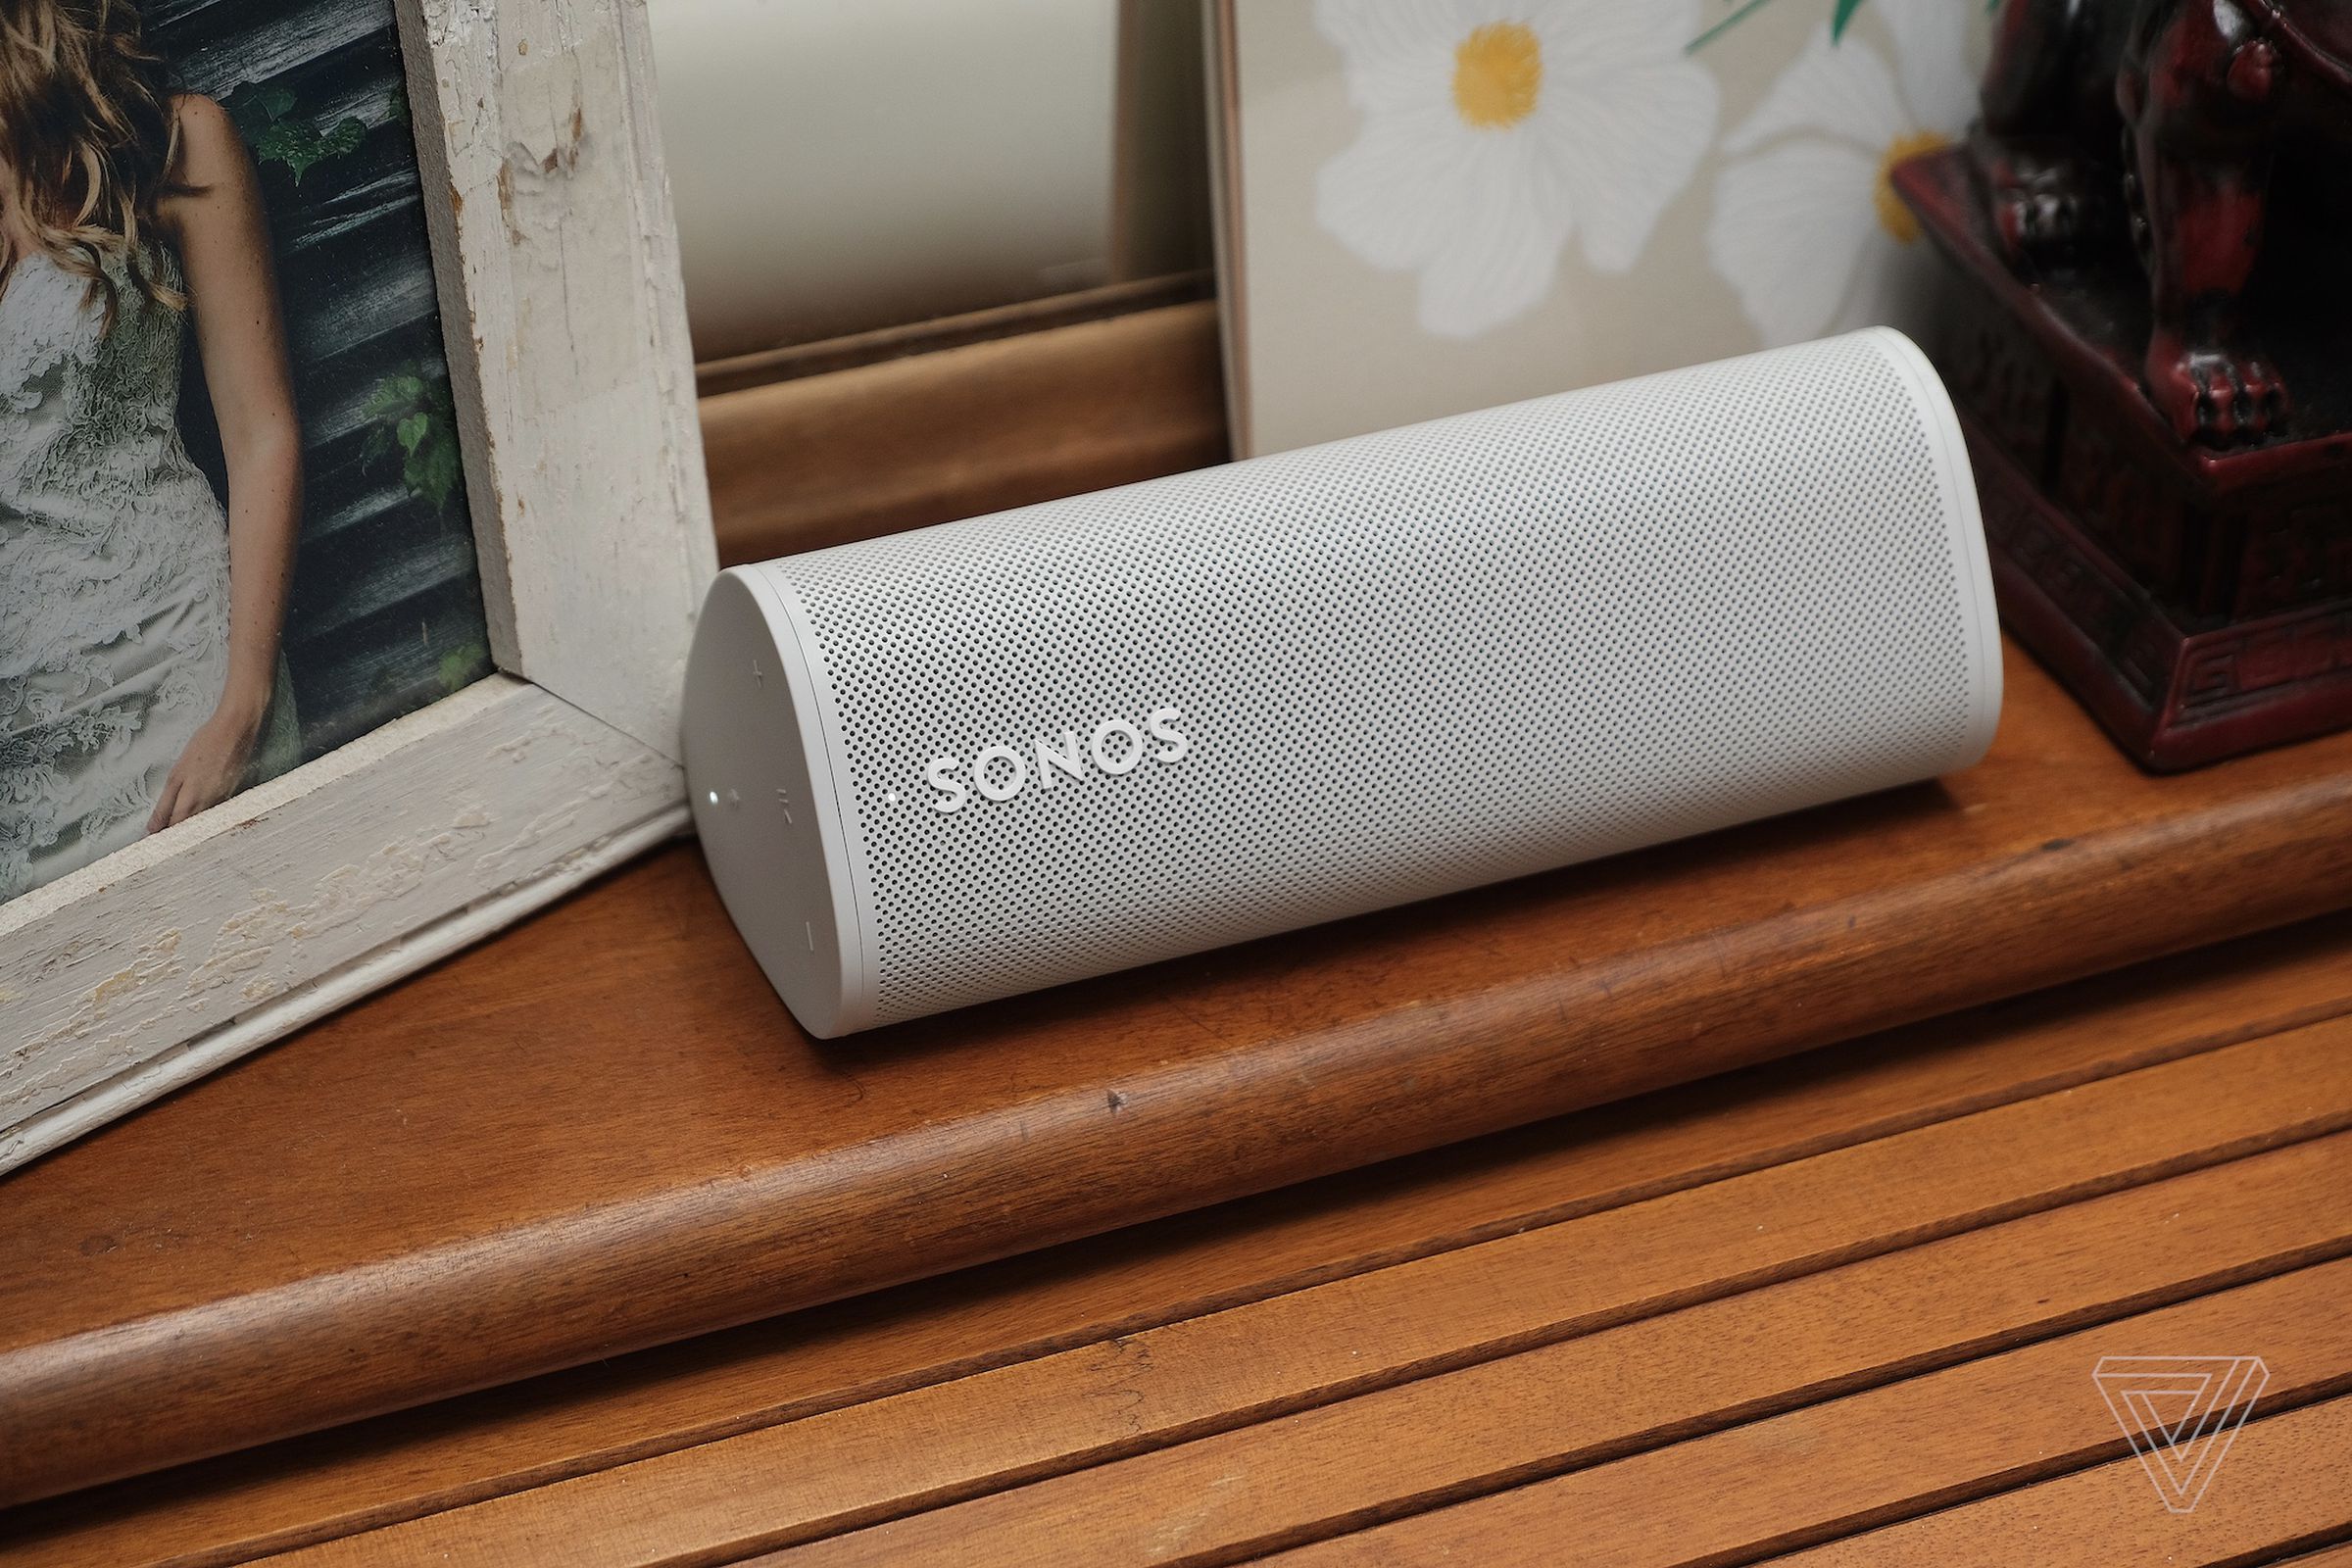 The Sonos Roam is selling for $143.20 instead of $179.99 for a limited time.